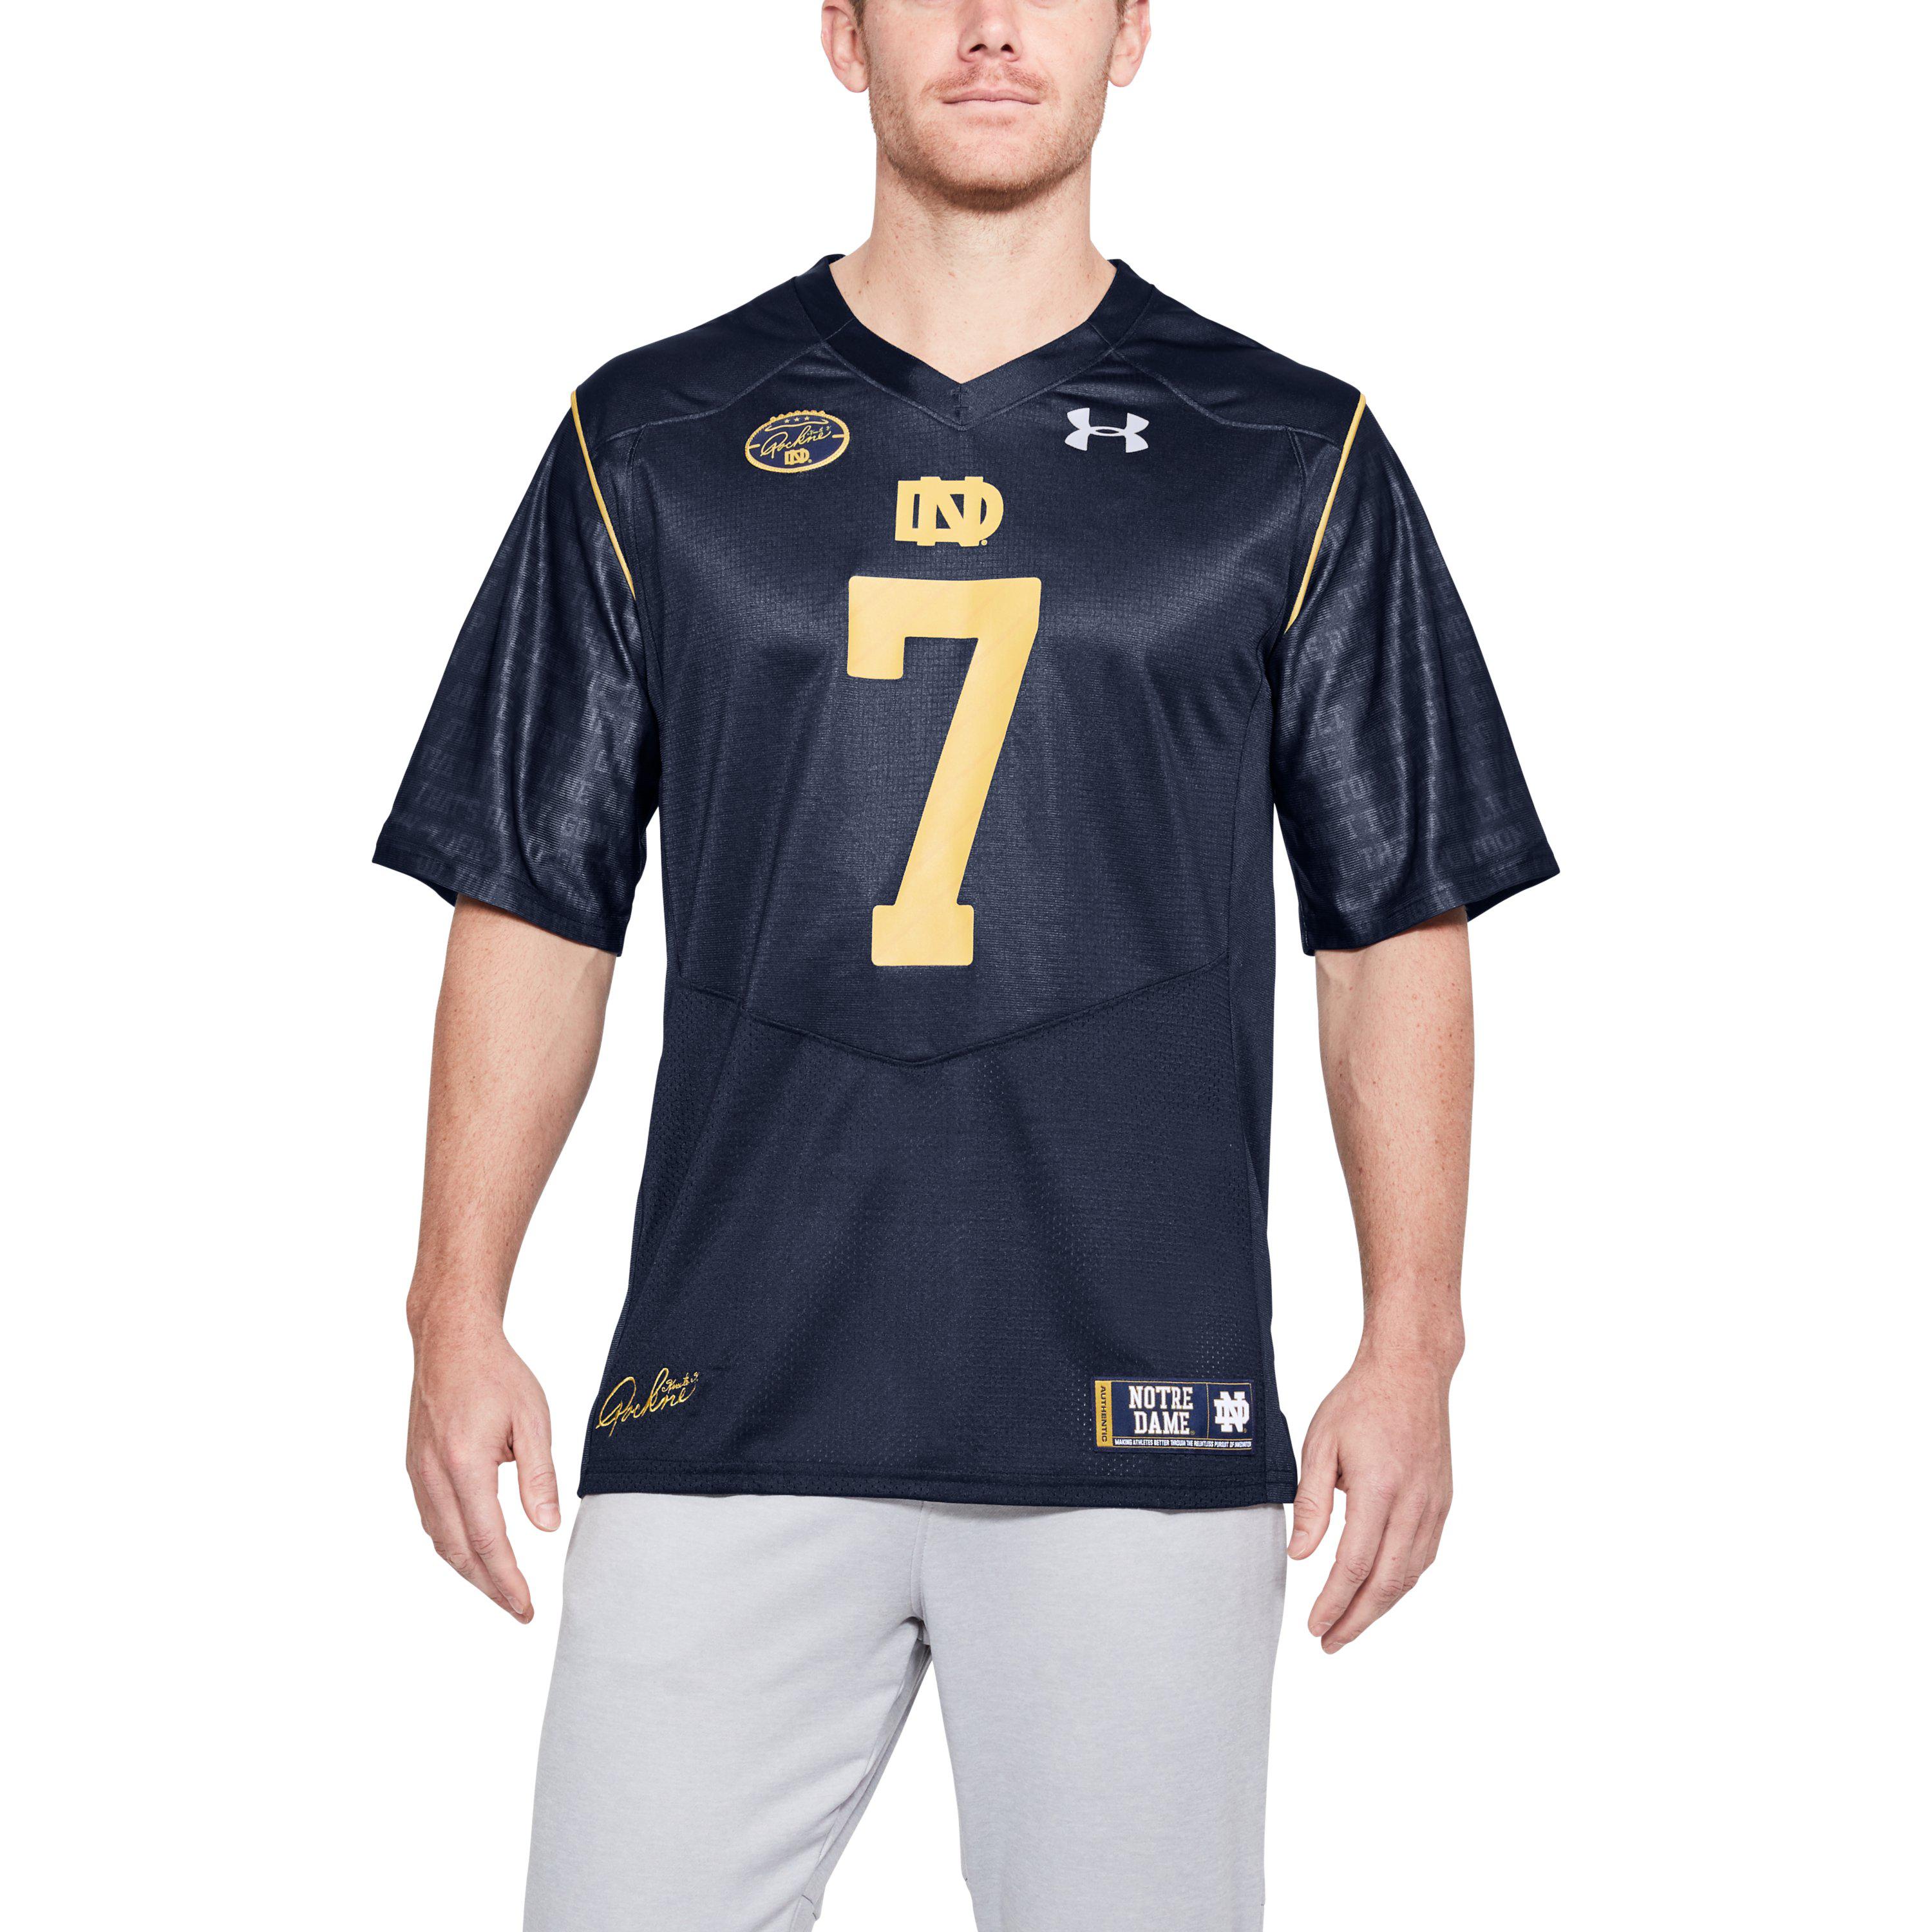 Notre Dame reveals new home jersey from Under Armor. : r